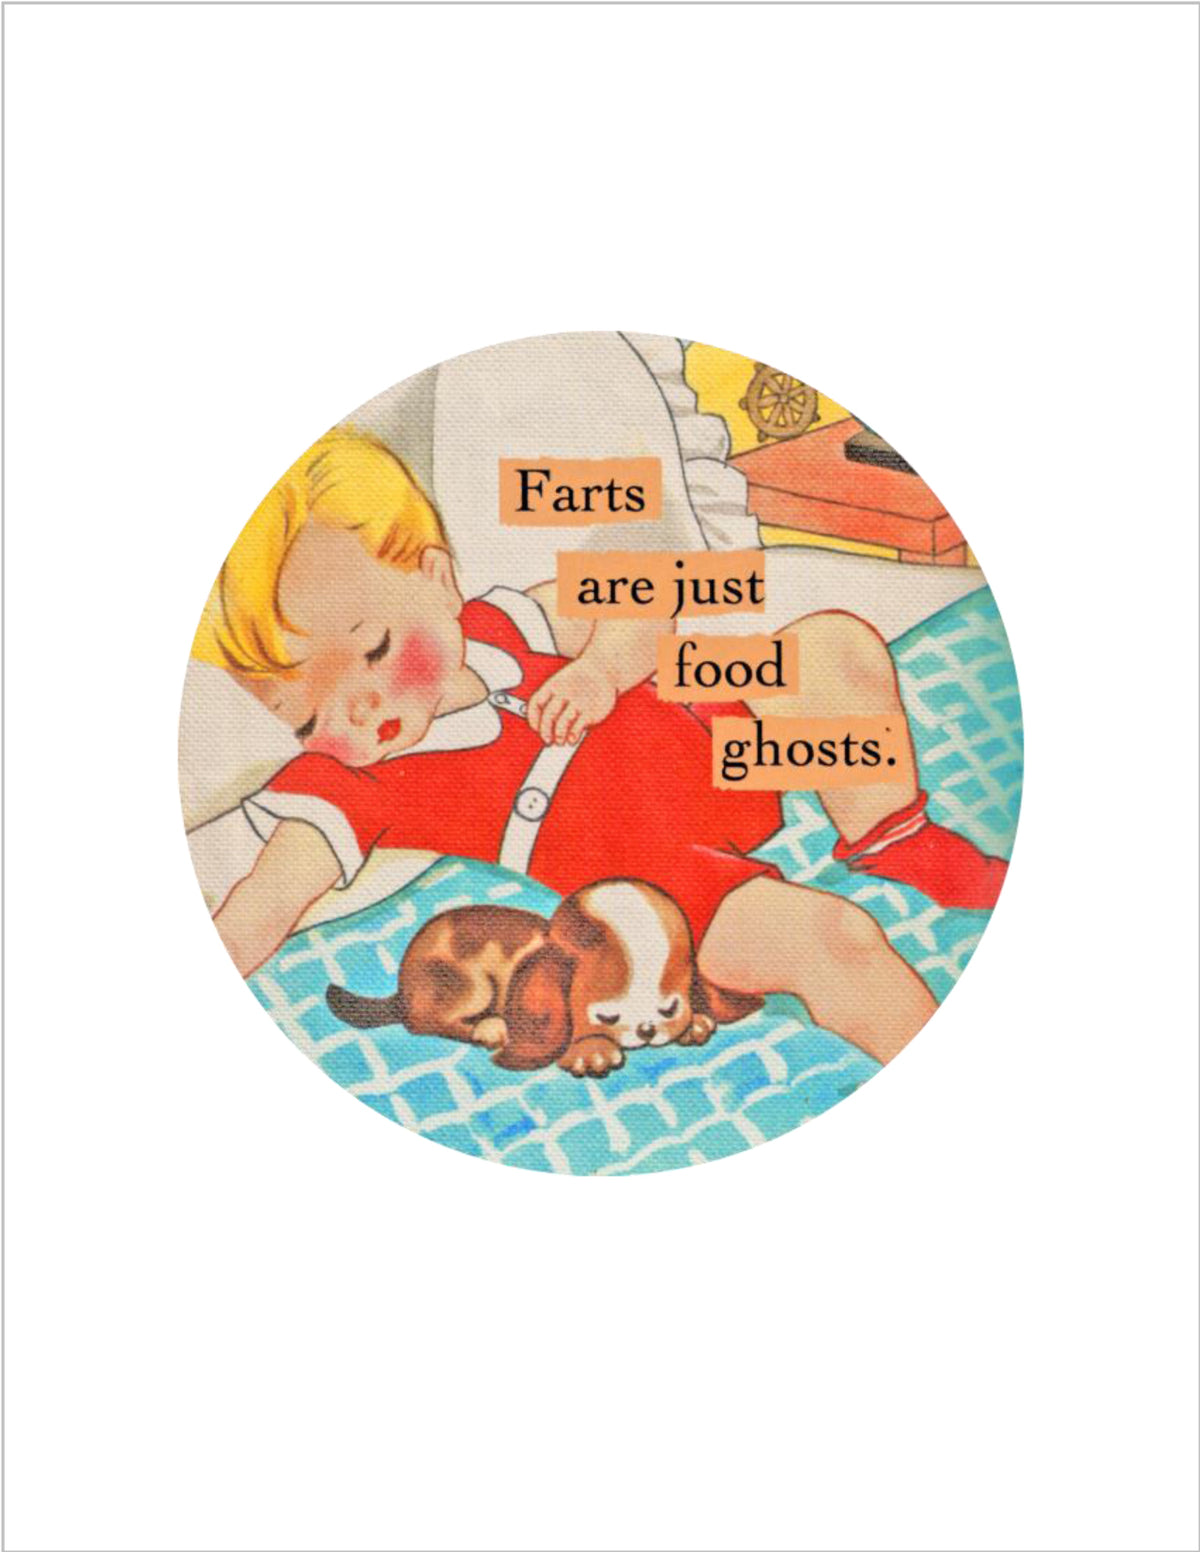 Farts-Dodgy Greeting Cards